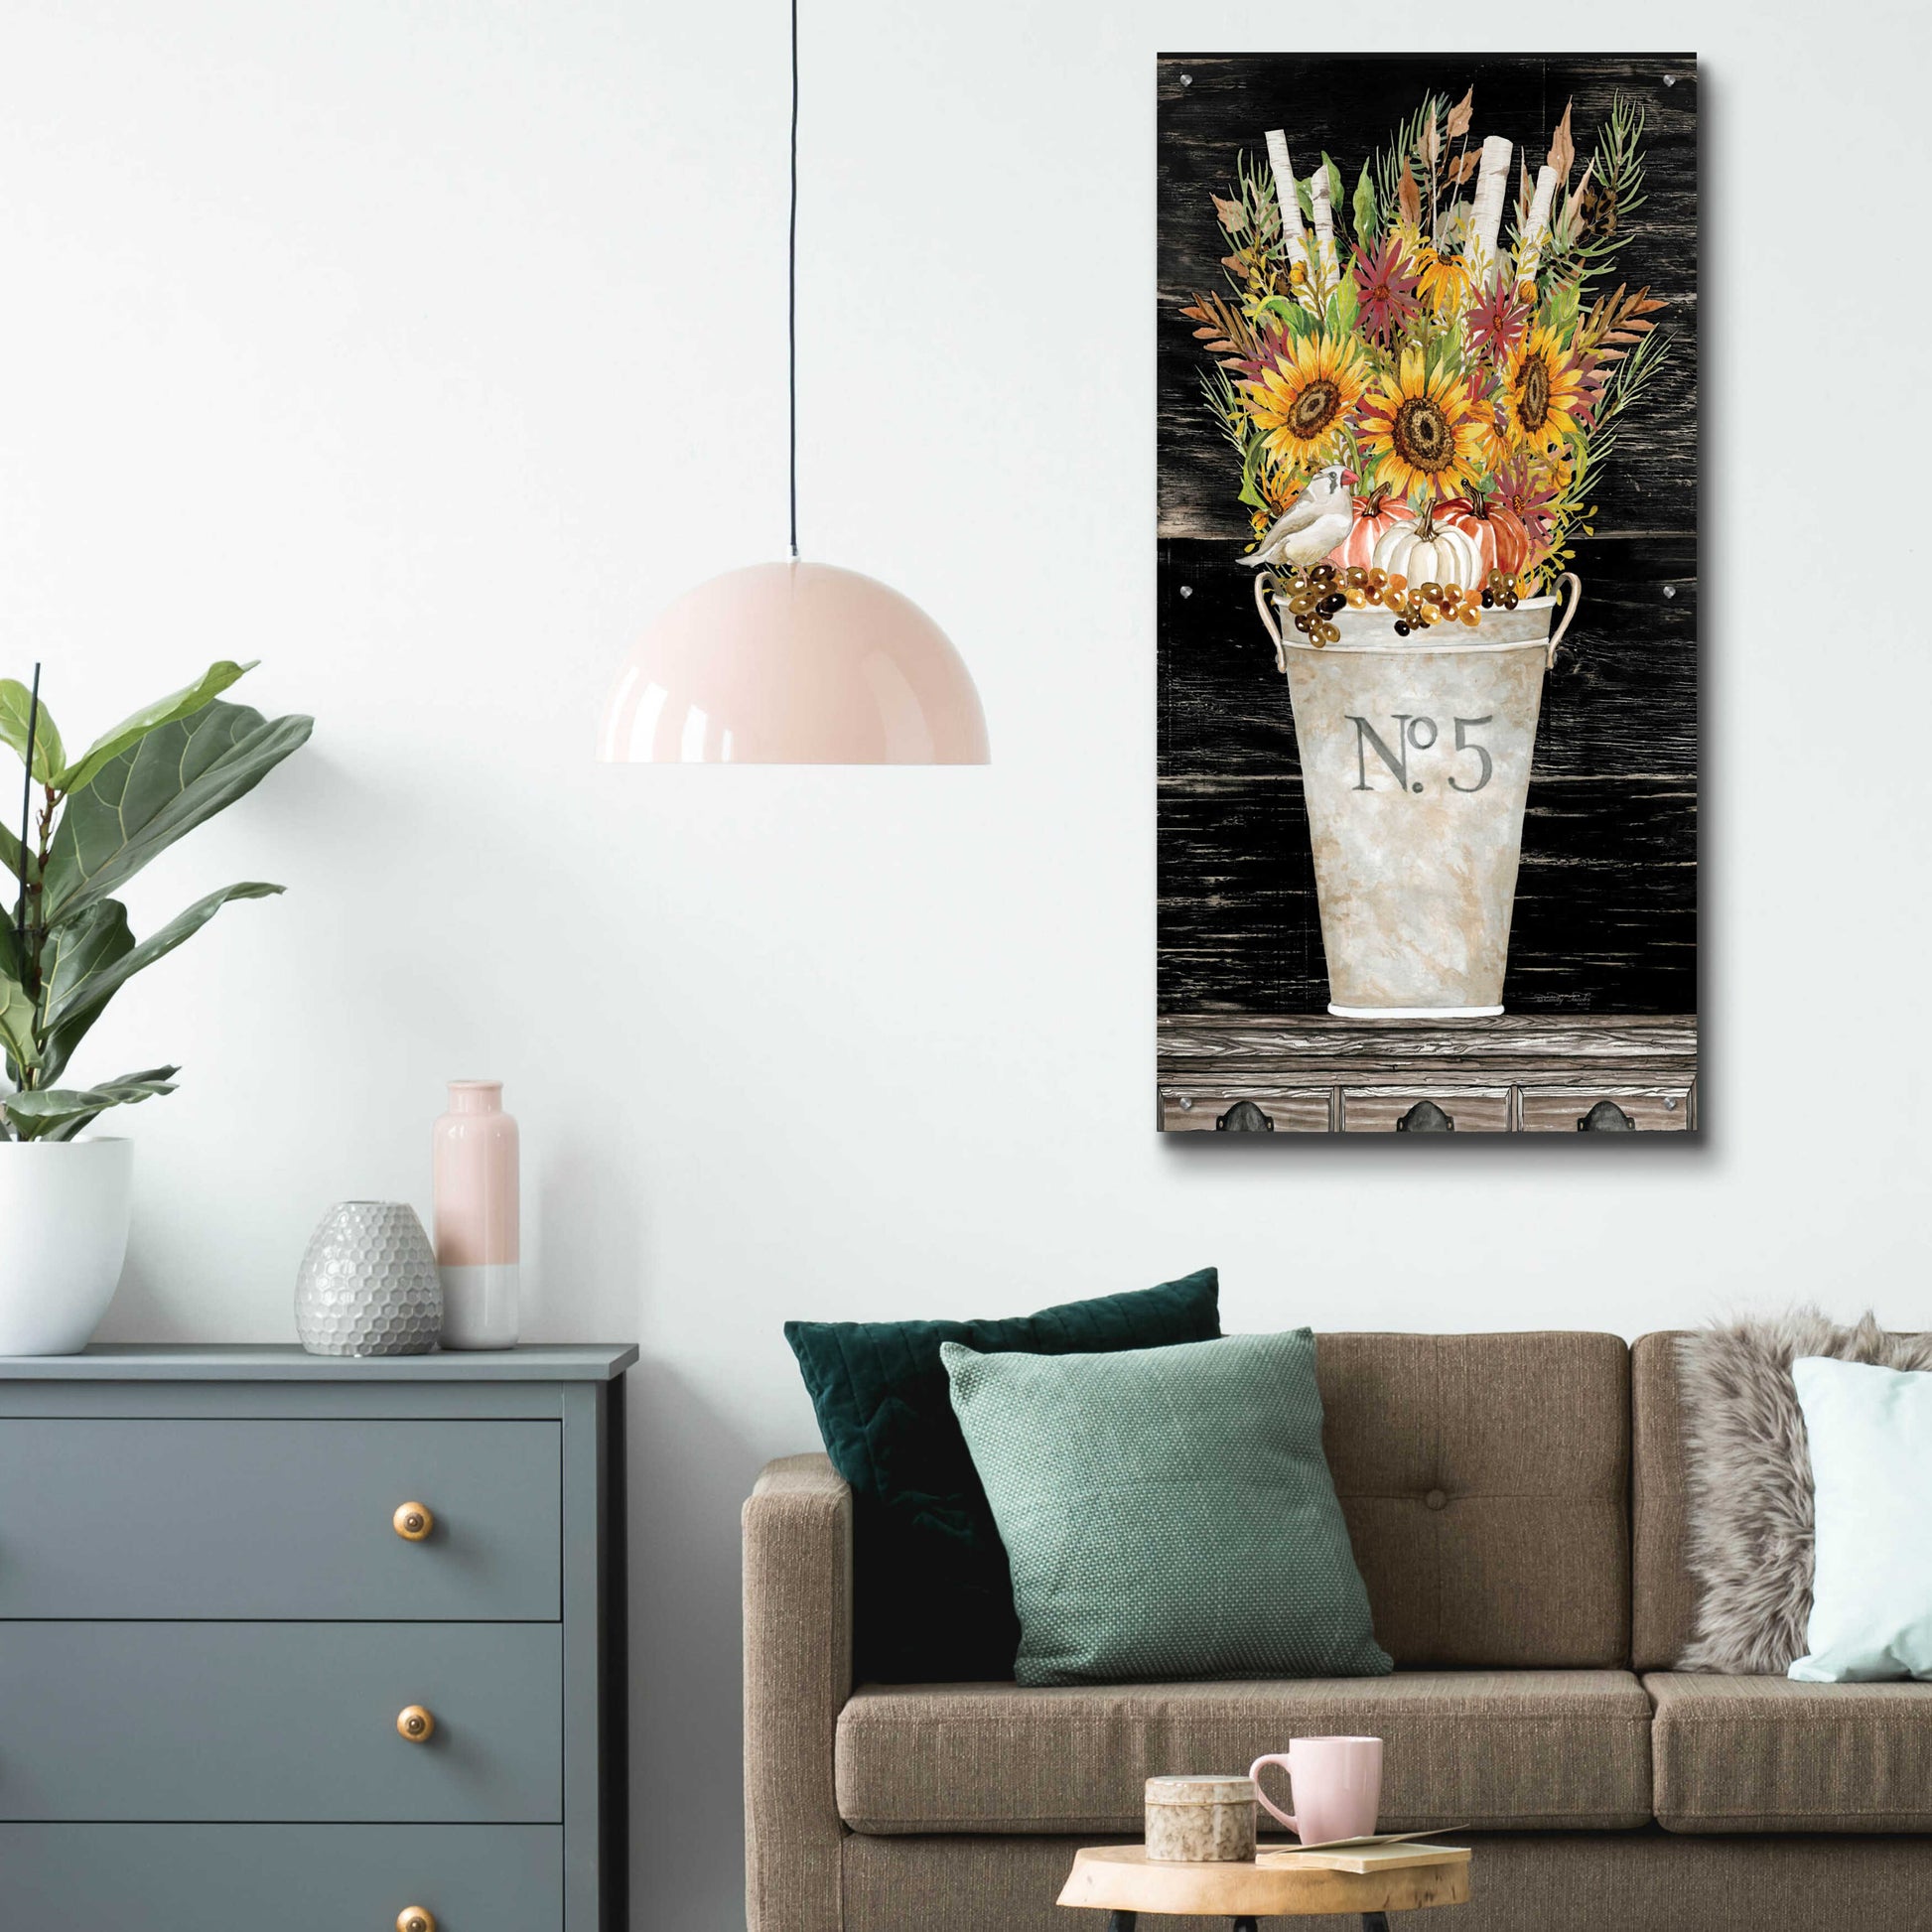 Epic Art 'No. 5 Fall Flowers and Birch 1' by Cindy Jacobs, Acrylic Glass Wall Art,24x48